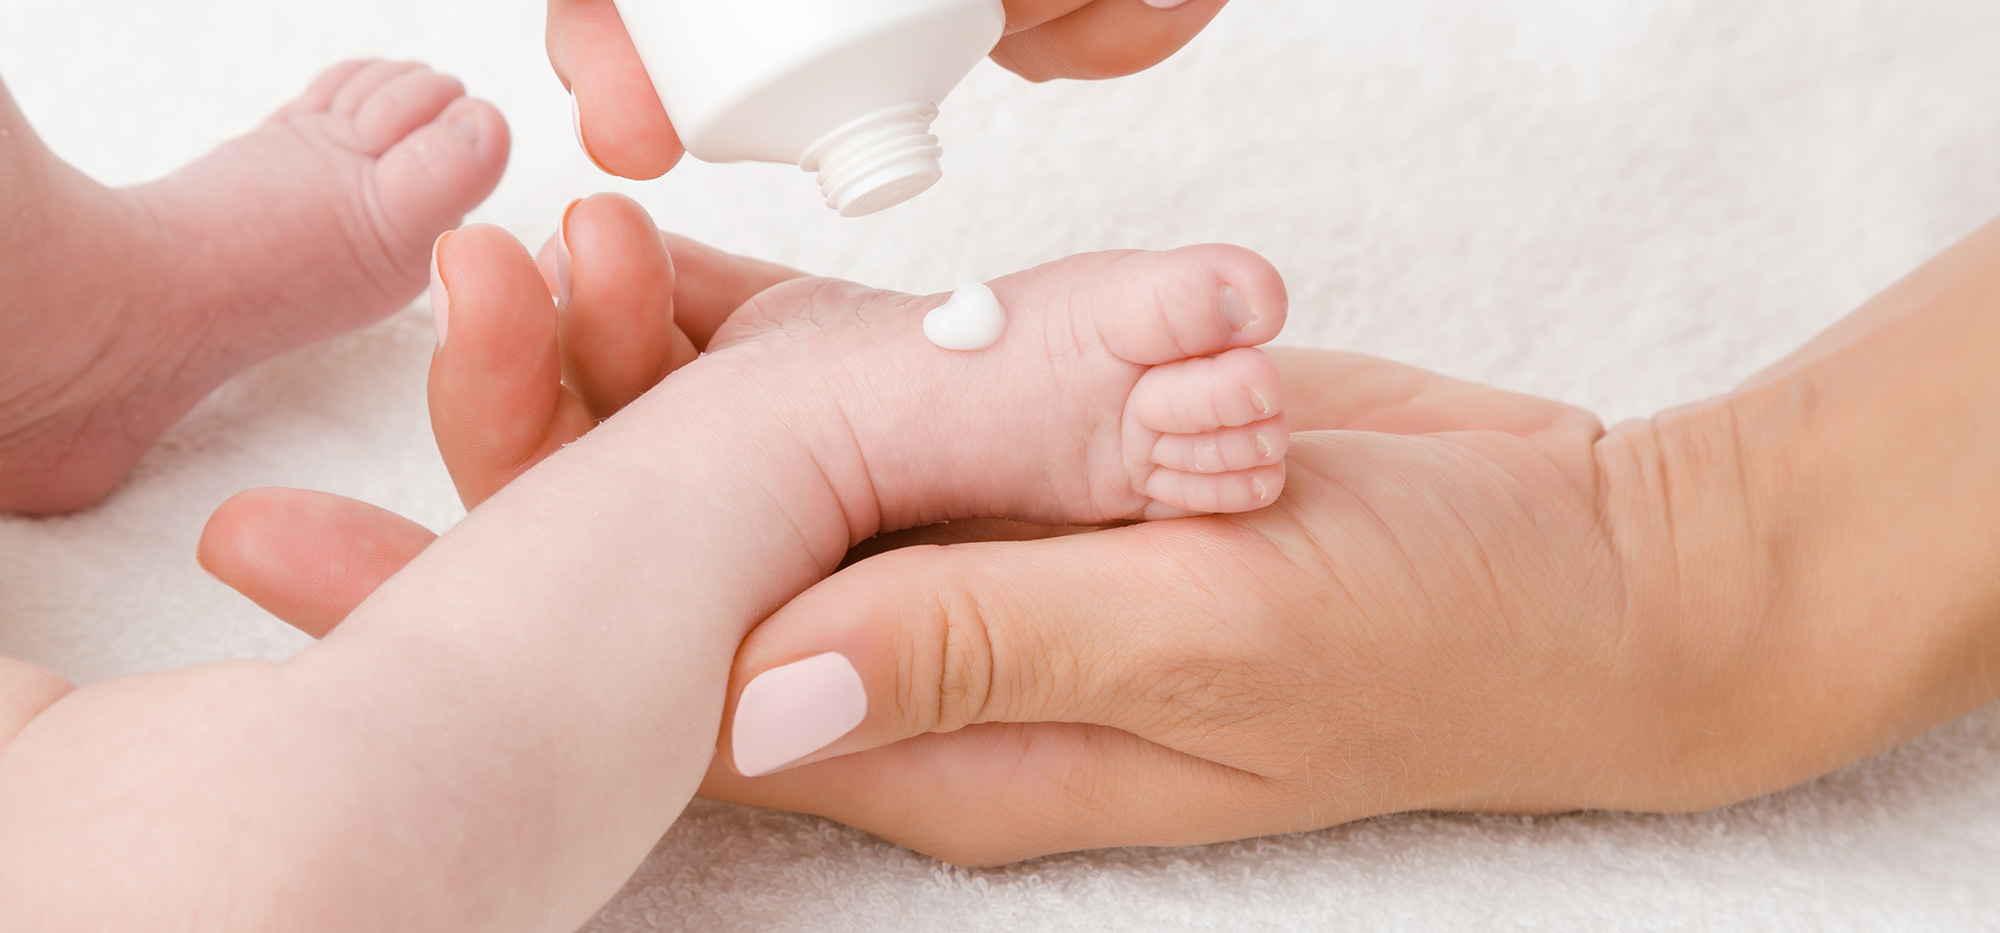 Moisturizing creams: Tips for parents